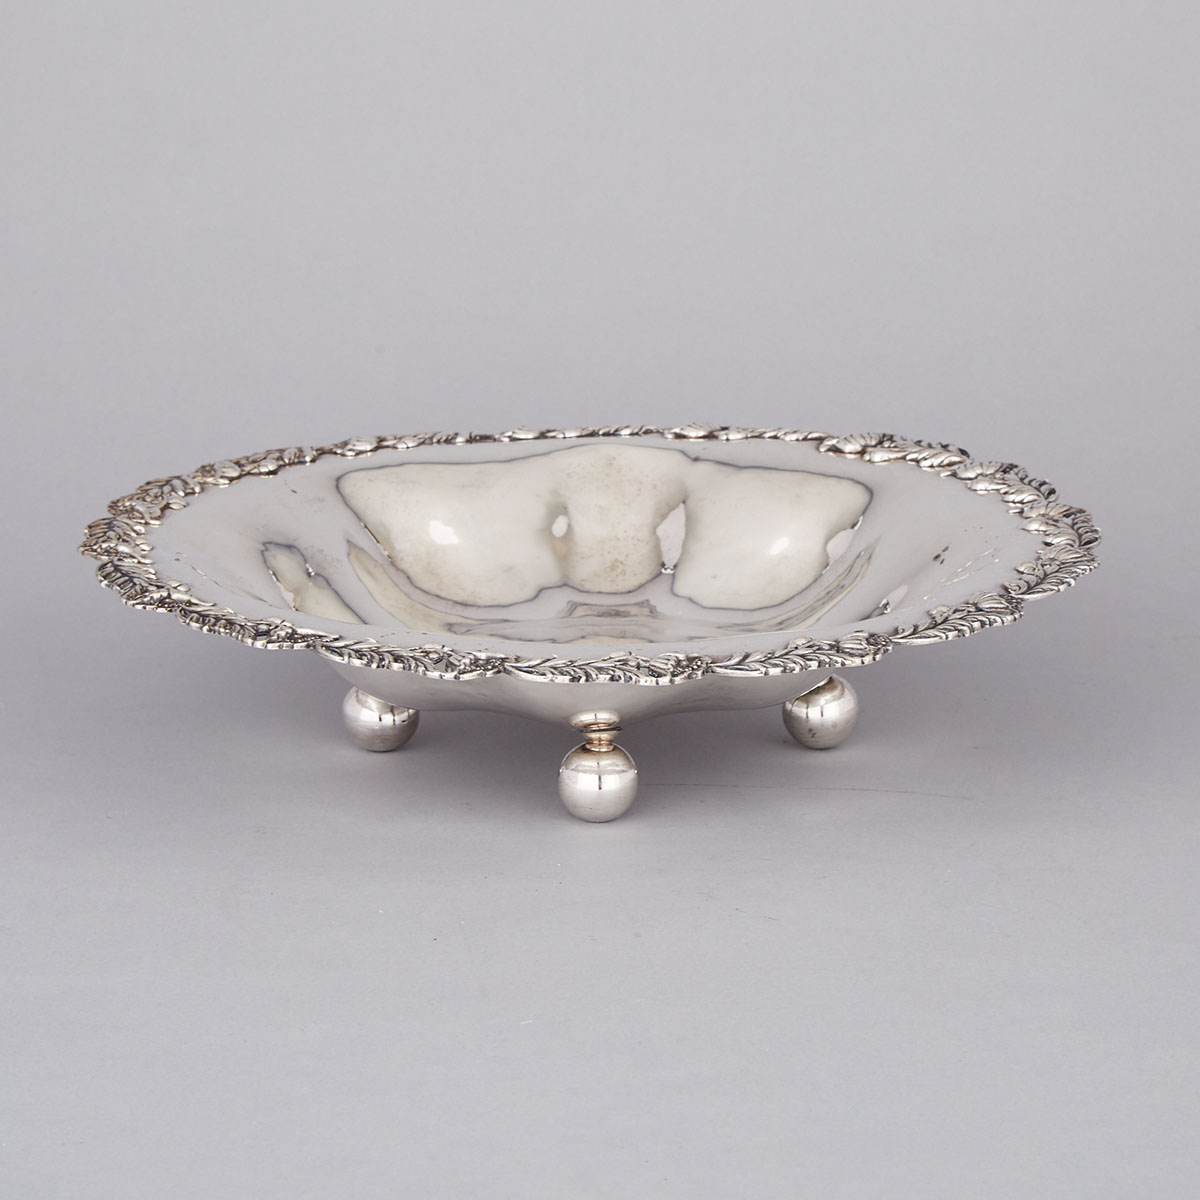 South American Silver Bowl, 20th century